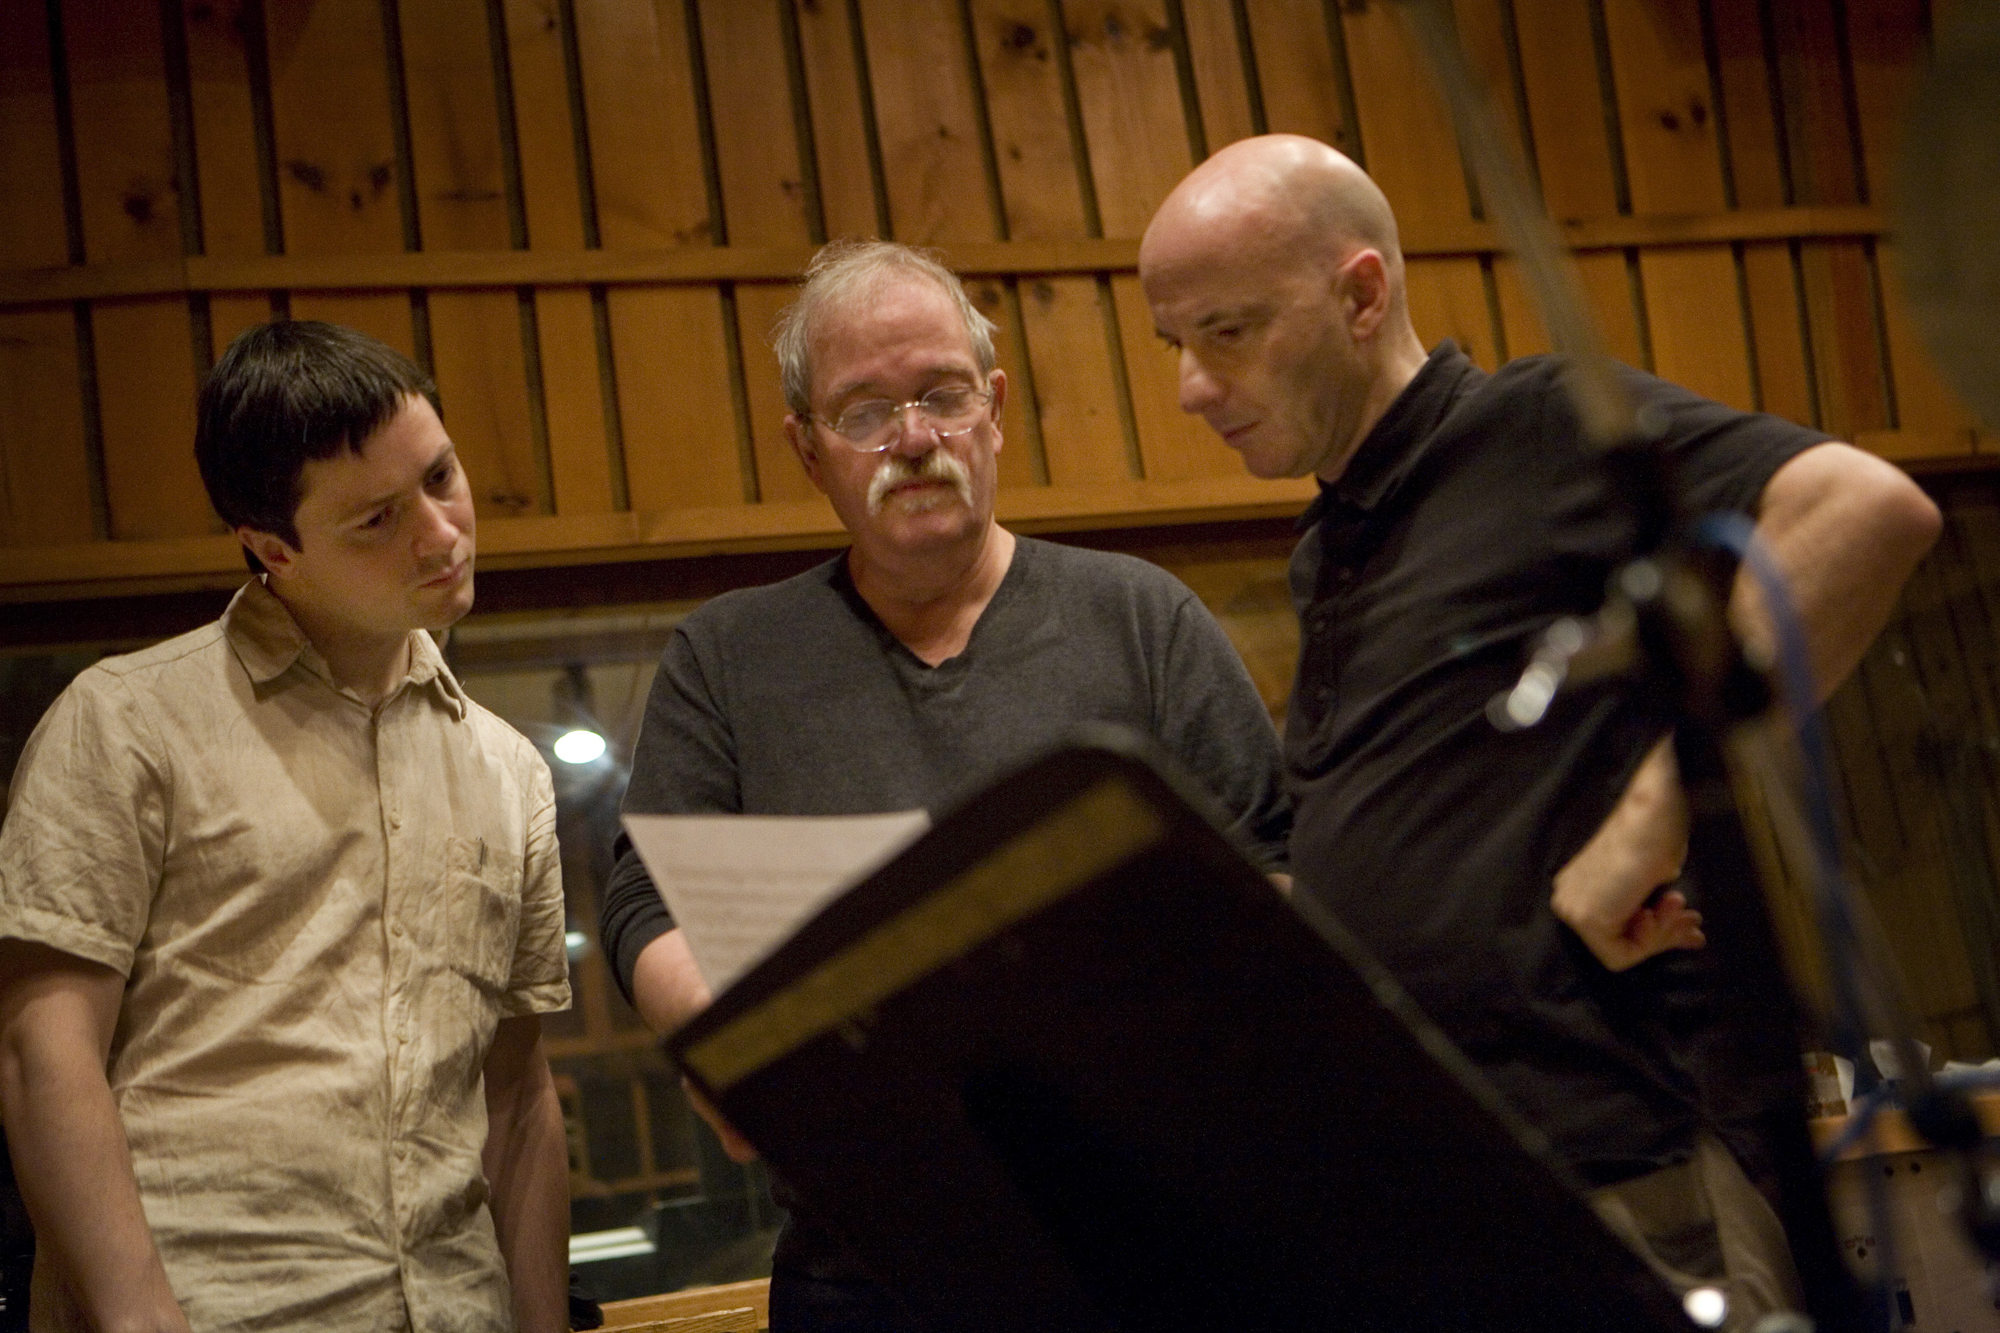 Thomas Morgan, John Abercrombie and Joey Baron looking over a score during the recording session for the 2009 album Wait Till You See Her (Photo © Robert Lewis, courtesy ECM).